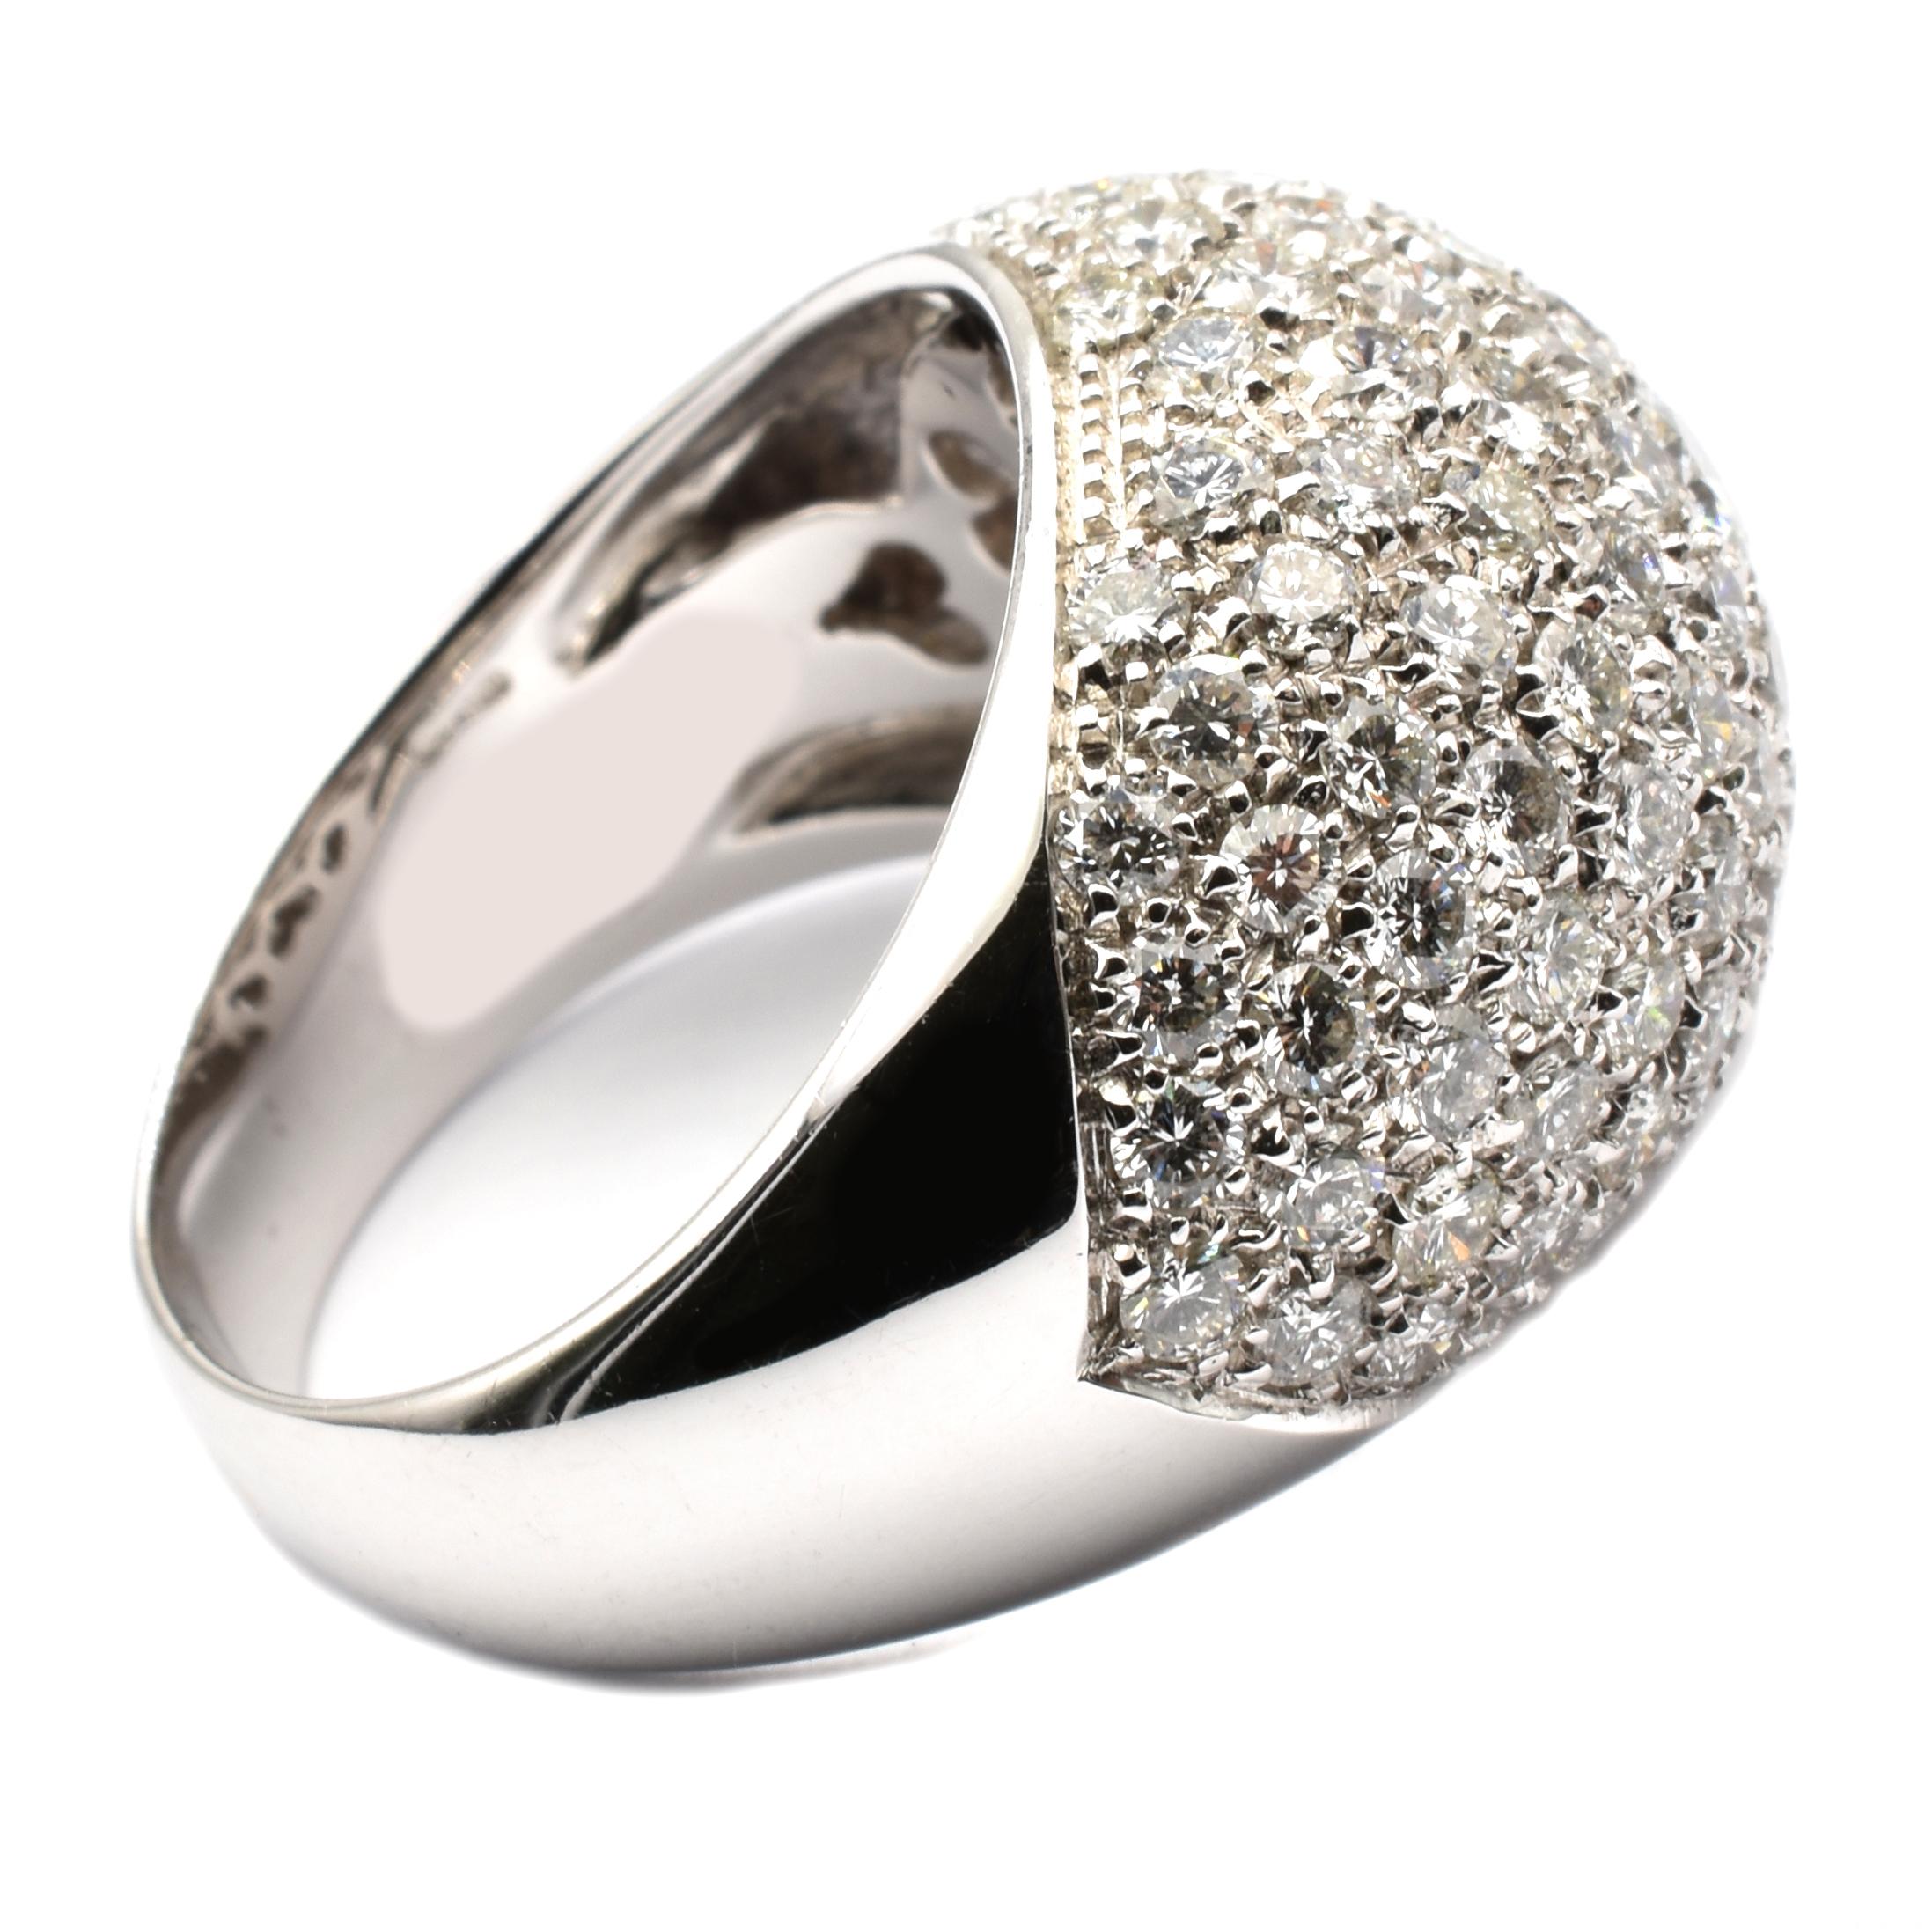 Contemporary Gilberto Cassola White Gold Pavee Diamond Ring Made in Italy For Sale